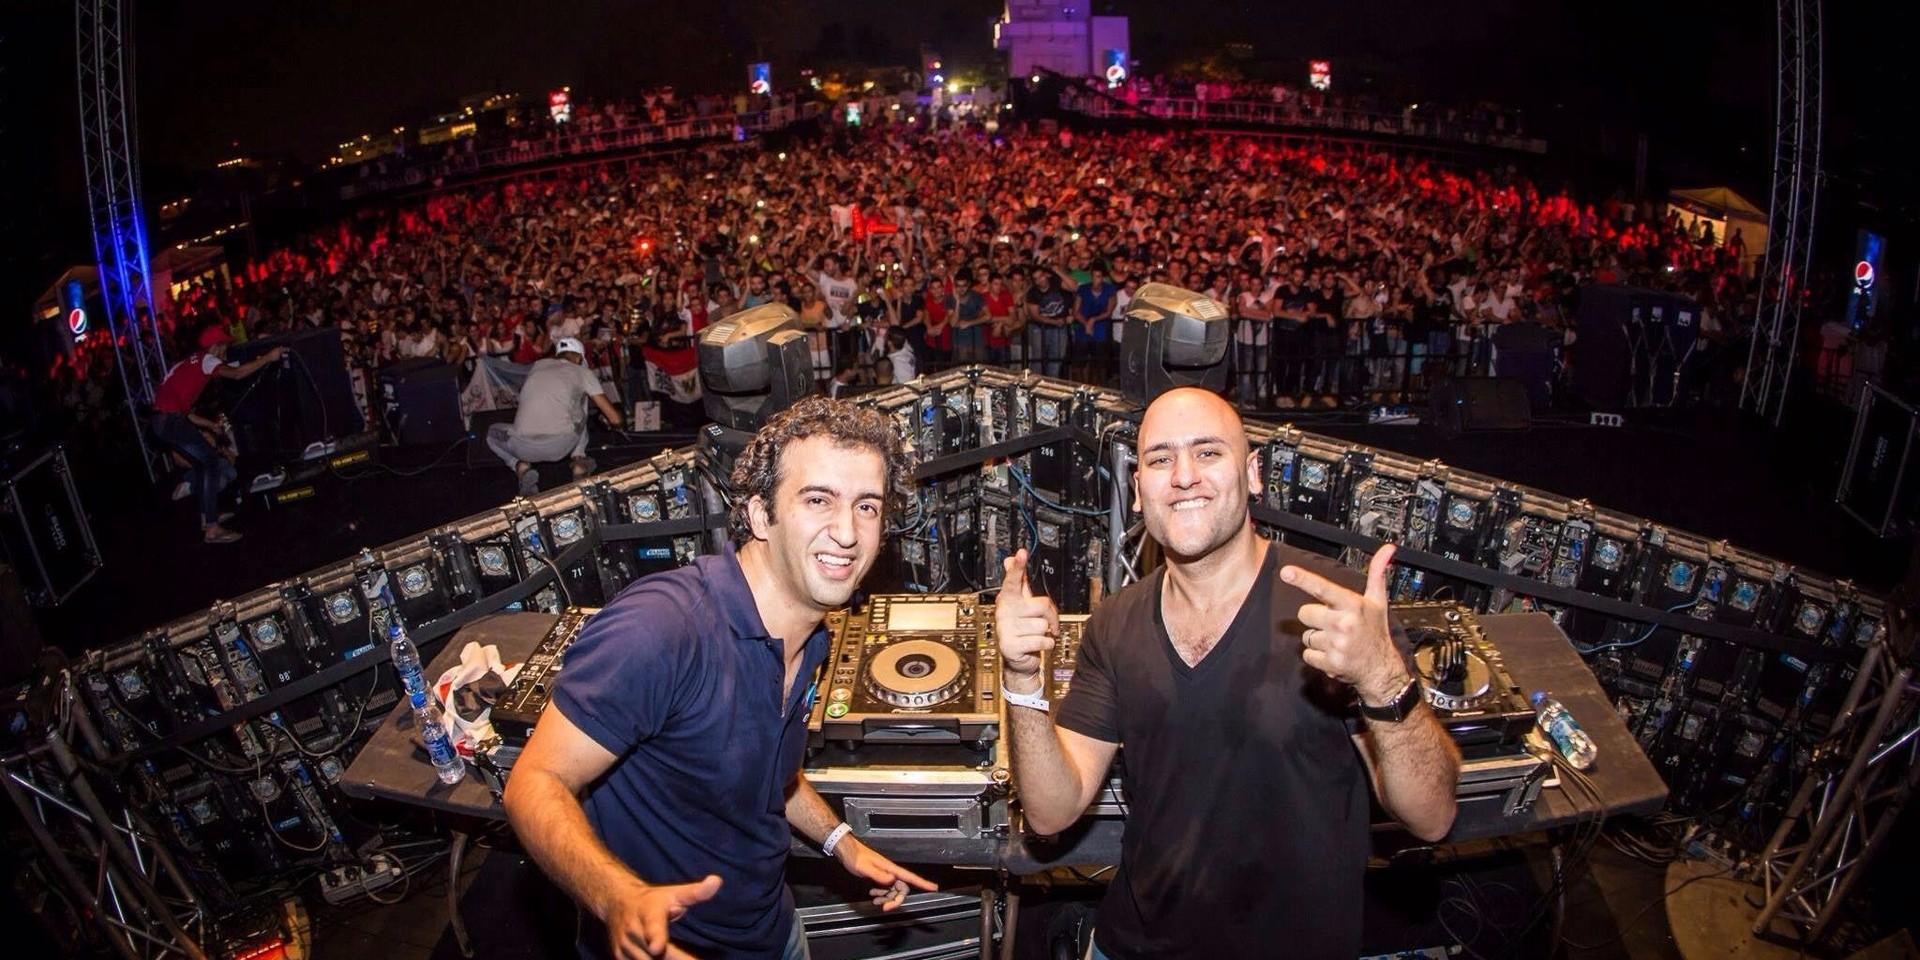 Trance DJs Aly & Fila are returning to Singapore this December